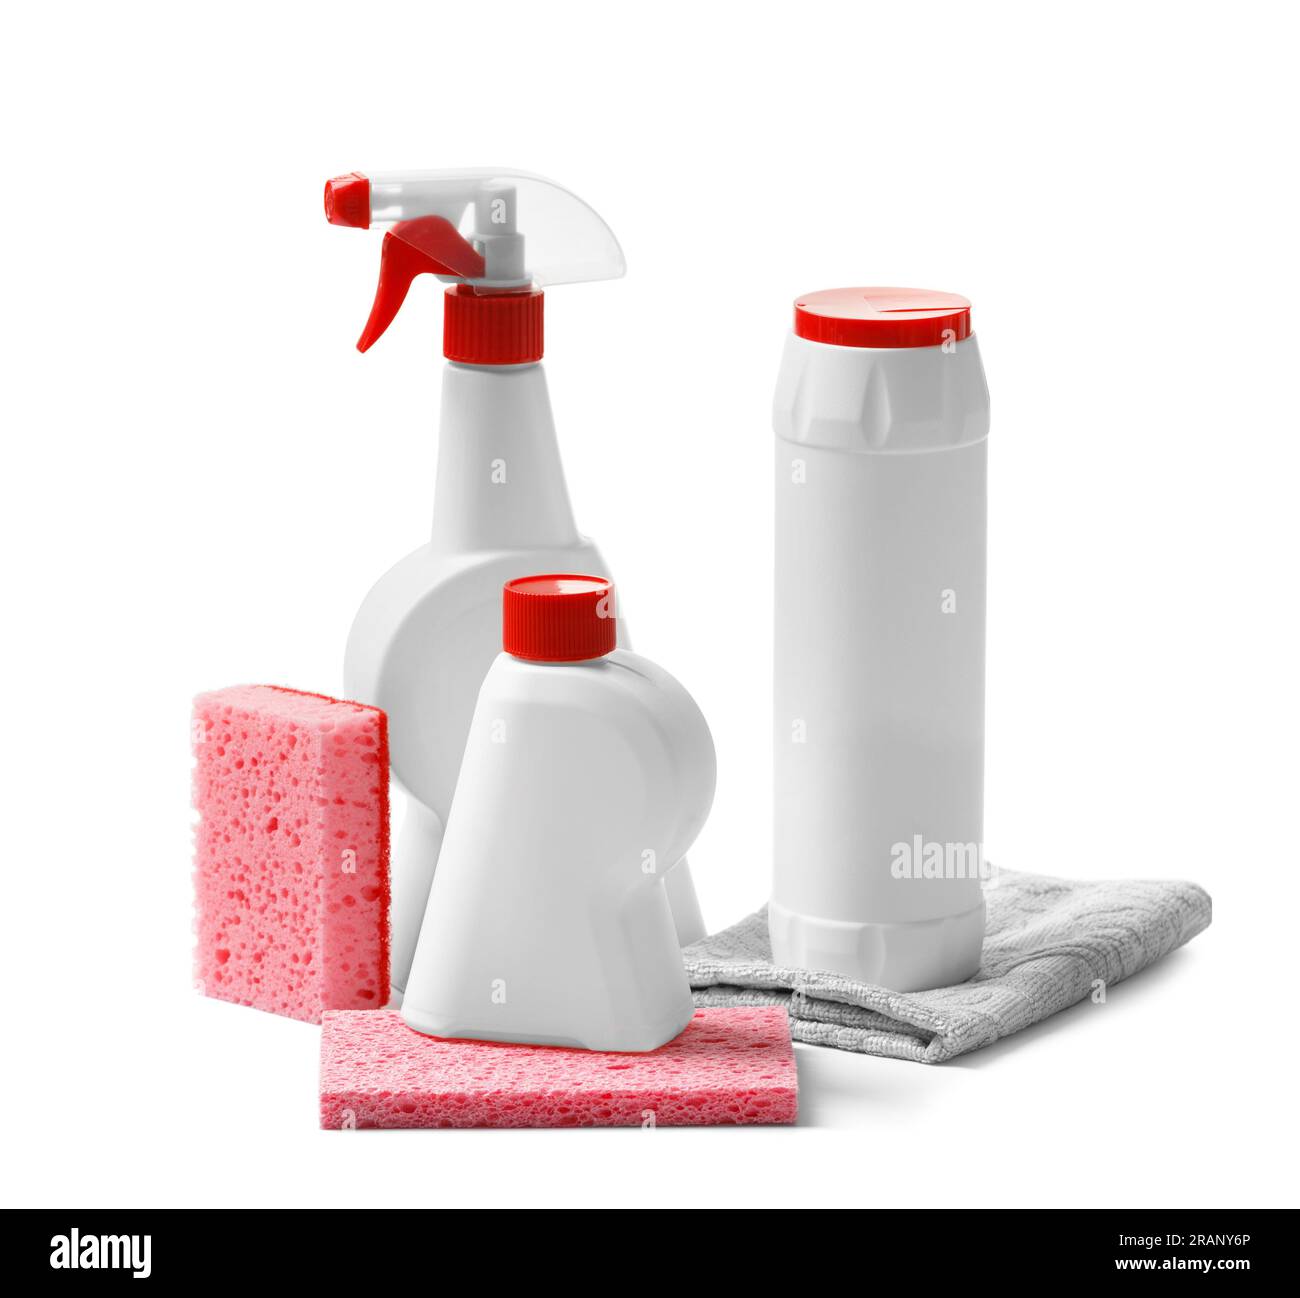 126,800+ House Cleaning Tools Stock Photos, Pictures & Royalty